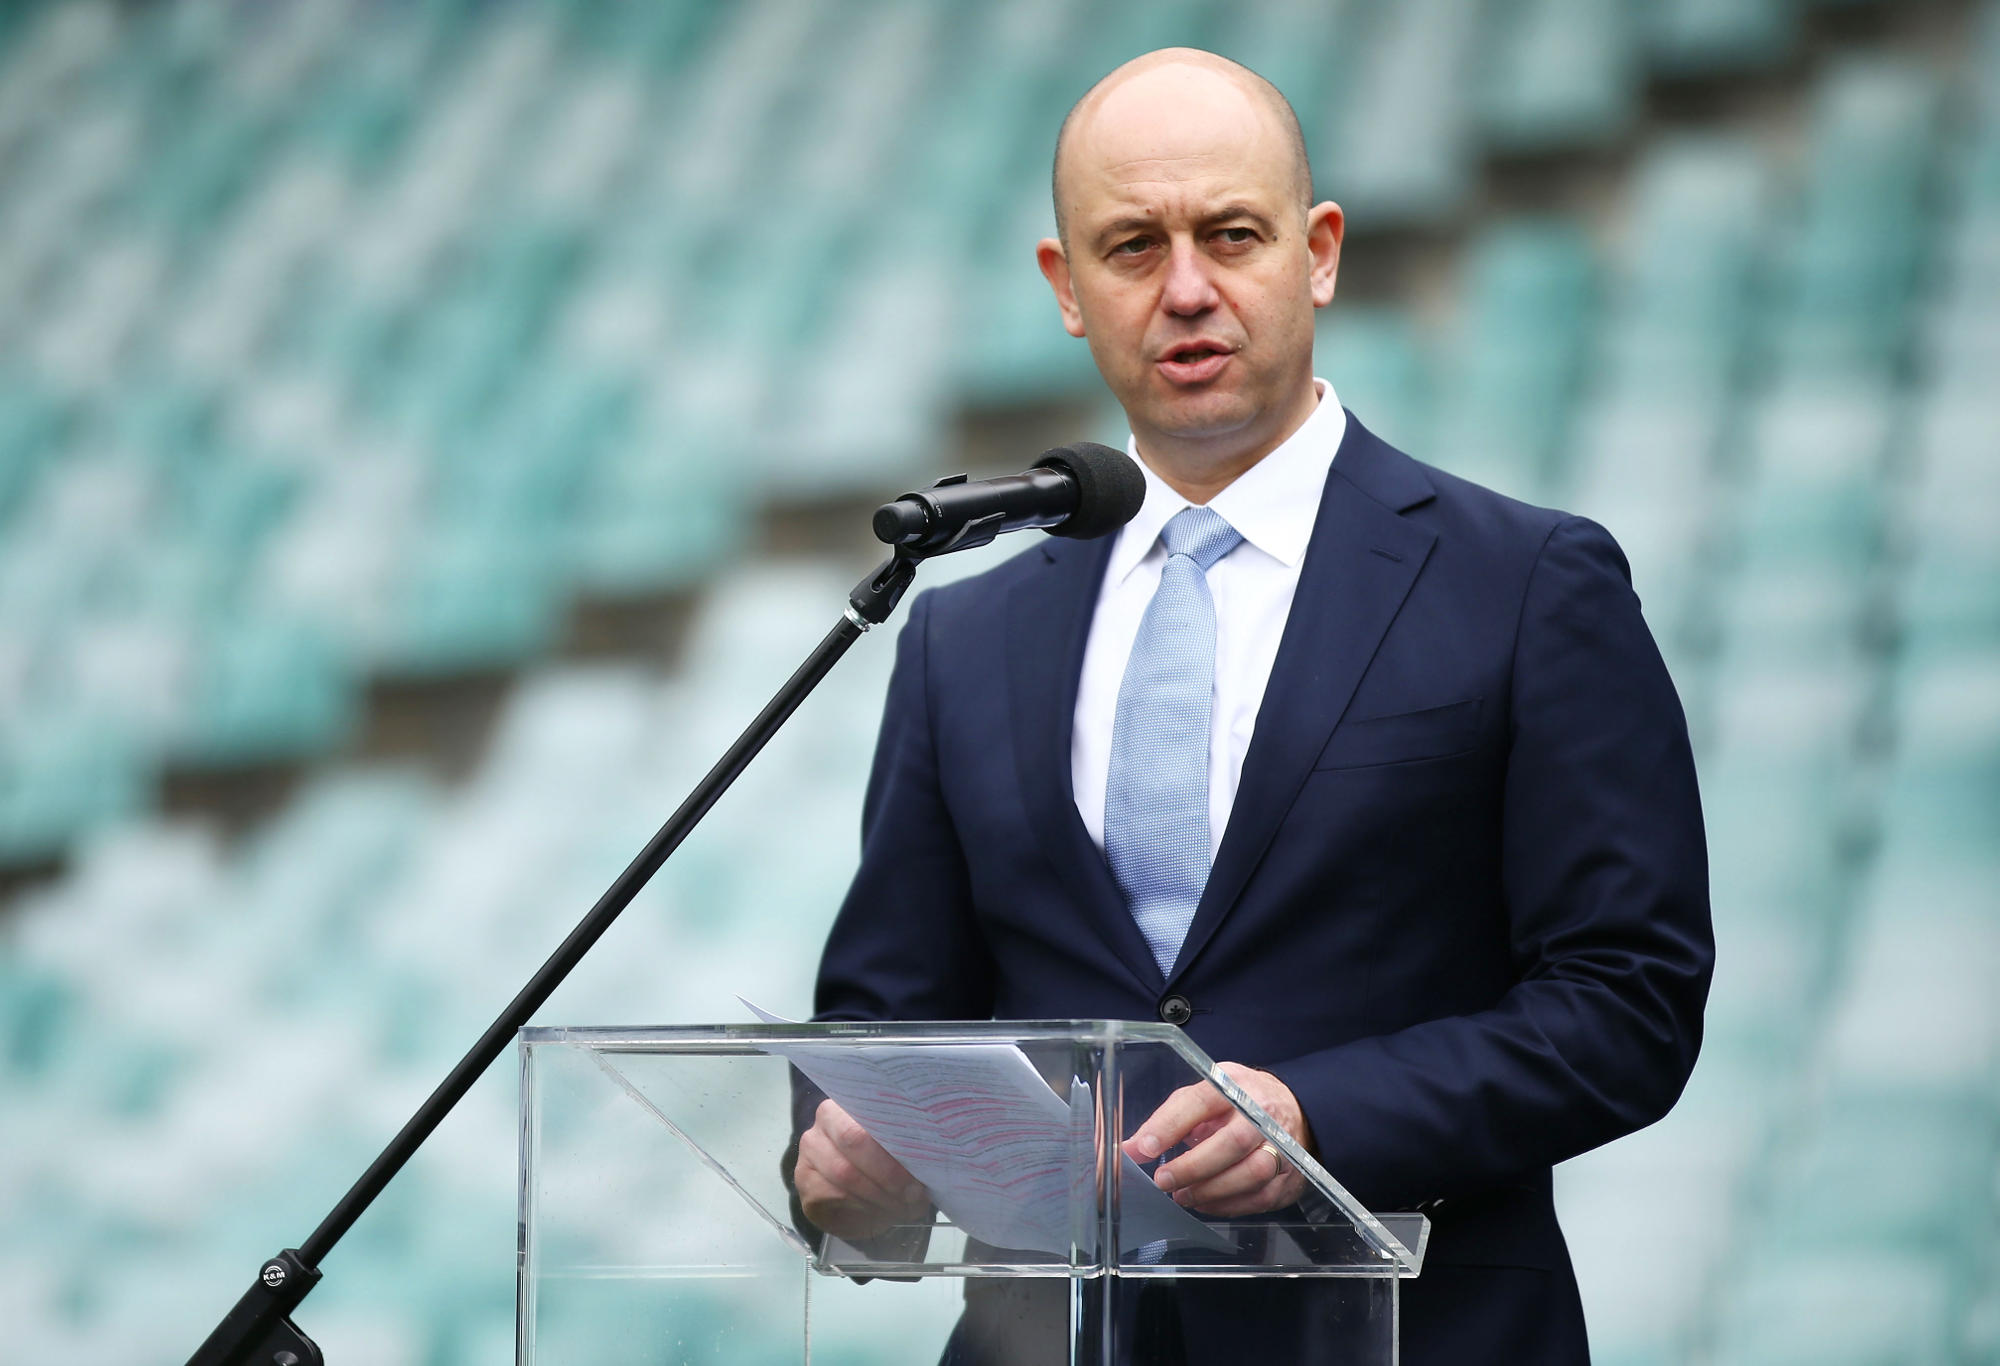 NRL CEO Todd Greenberg speaks during the 2018 NRL Finals Series Launch at Allianz Stadium on September 3, 2018 in Sydney, Australia.